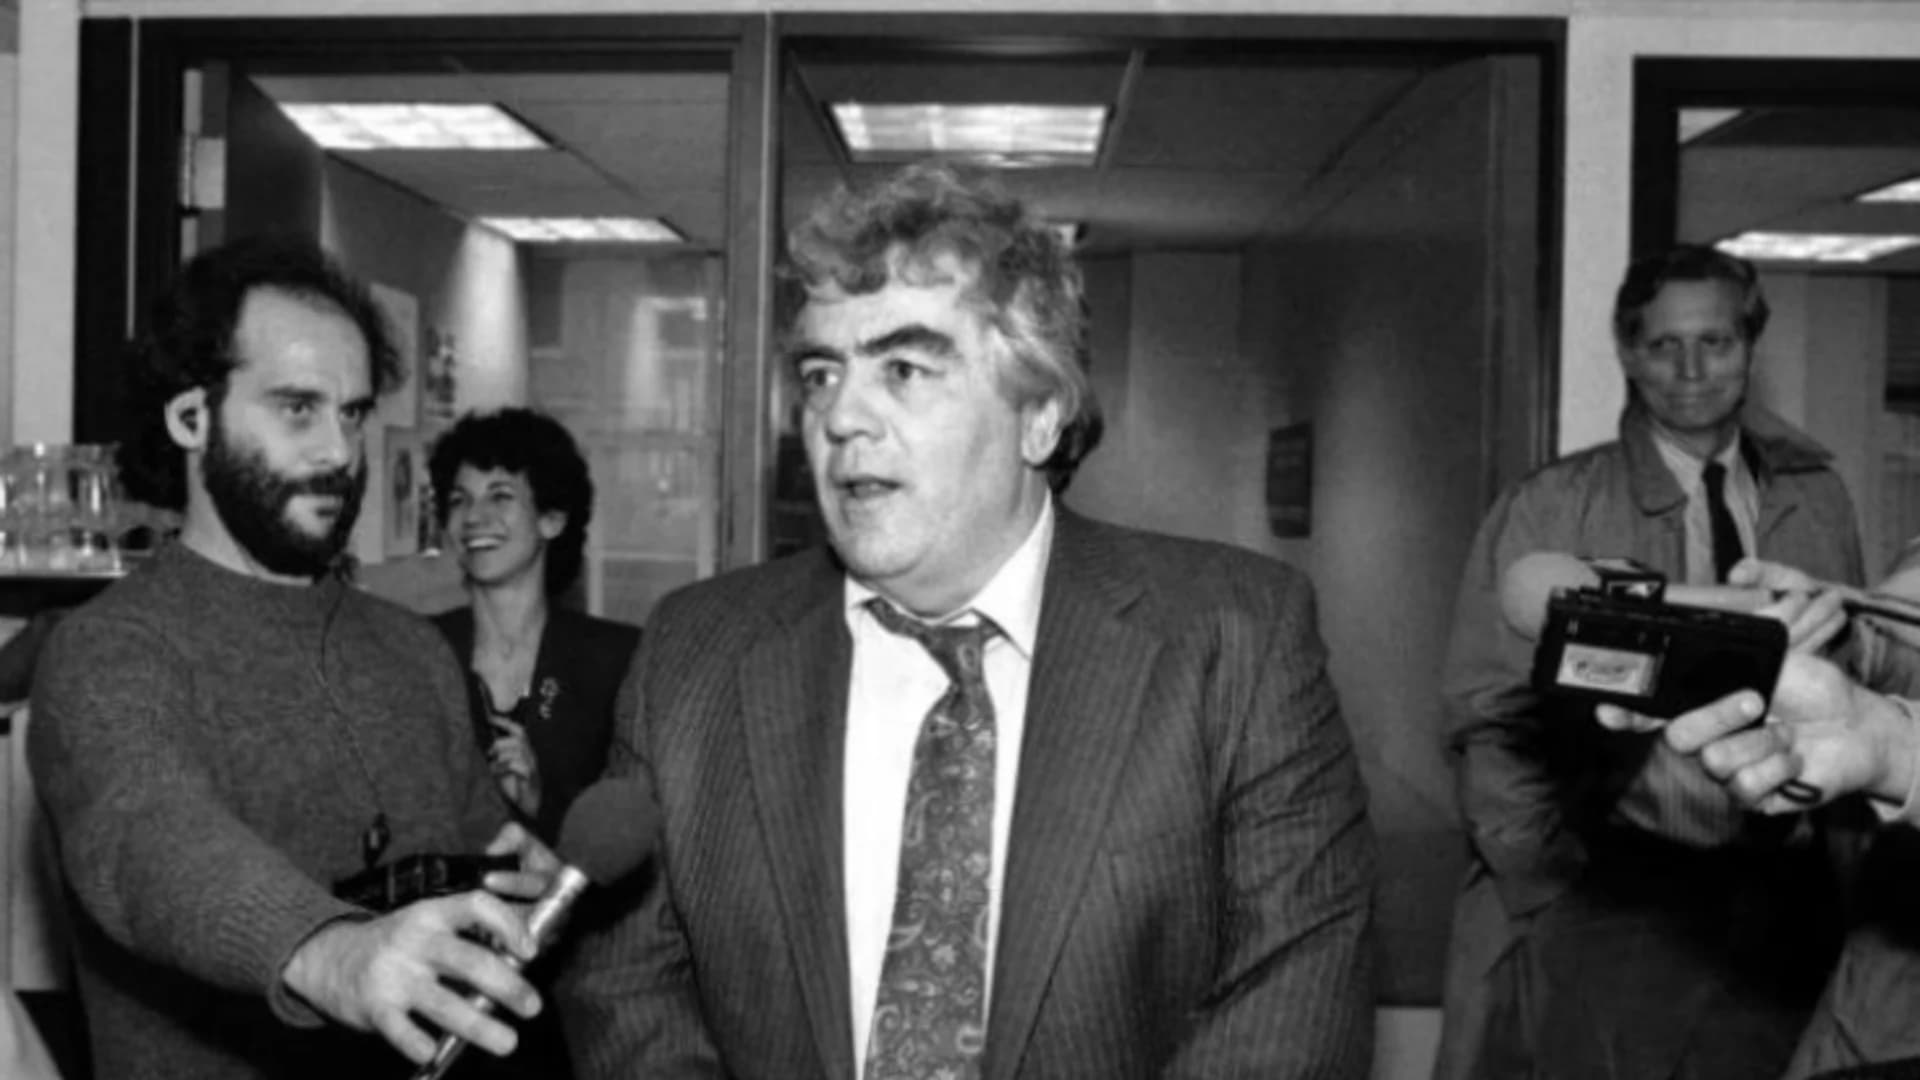 Jimmy Breslin, chronicler of wise guys and underdogs, dies at 88